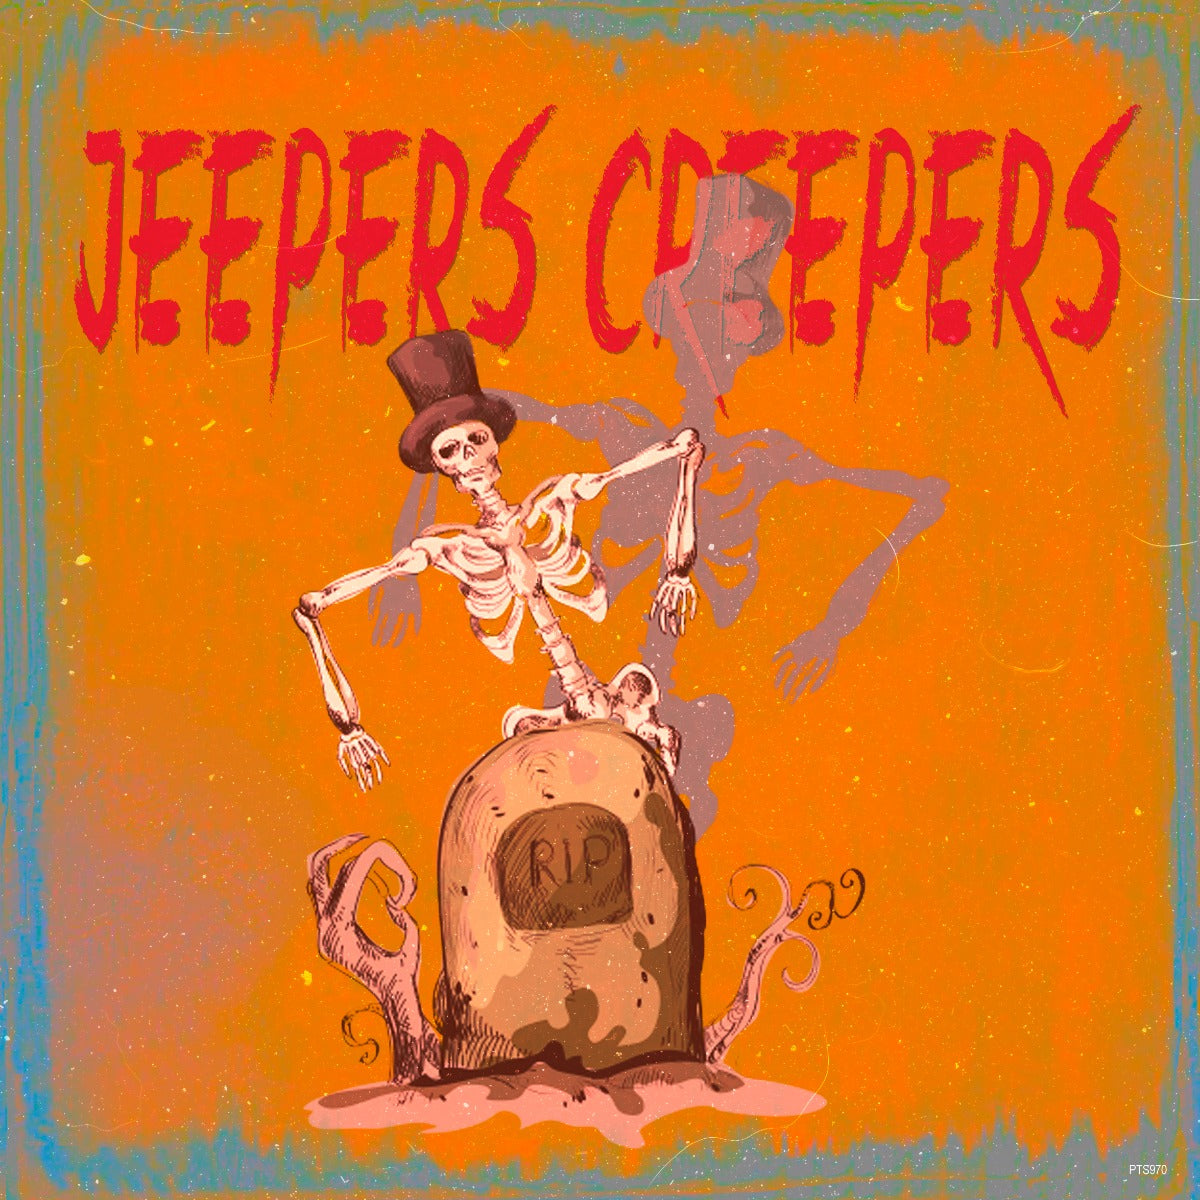 Jeepers Creepers Skeleton Vintage Sign